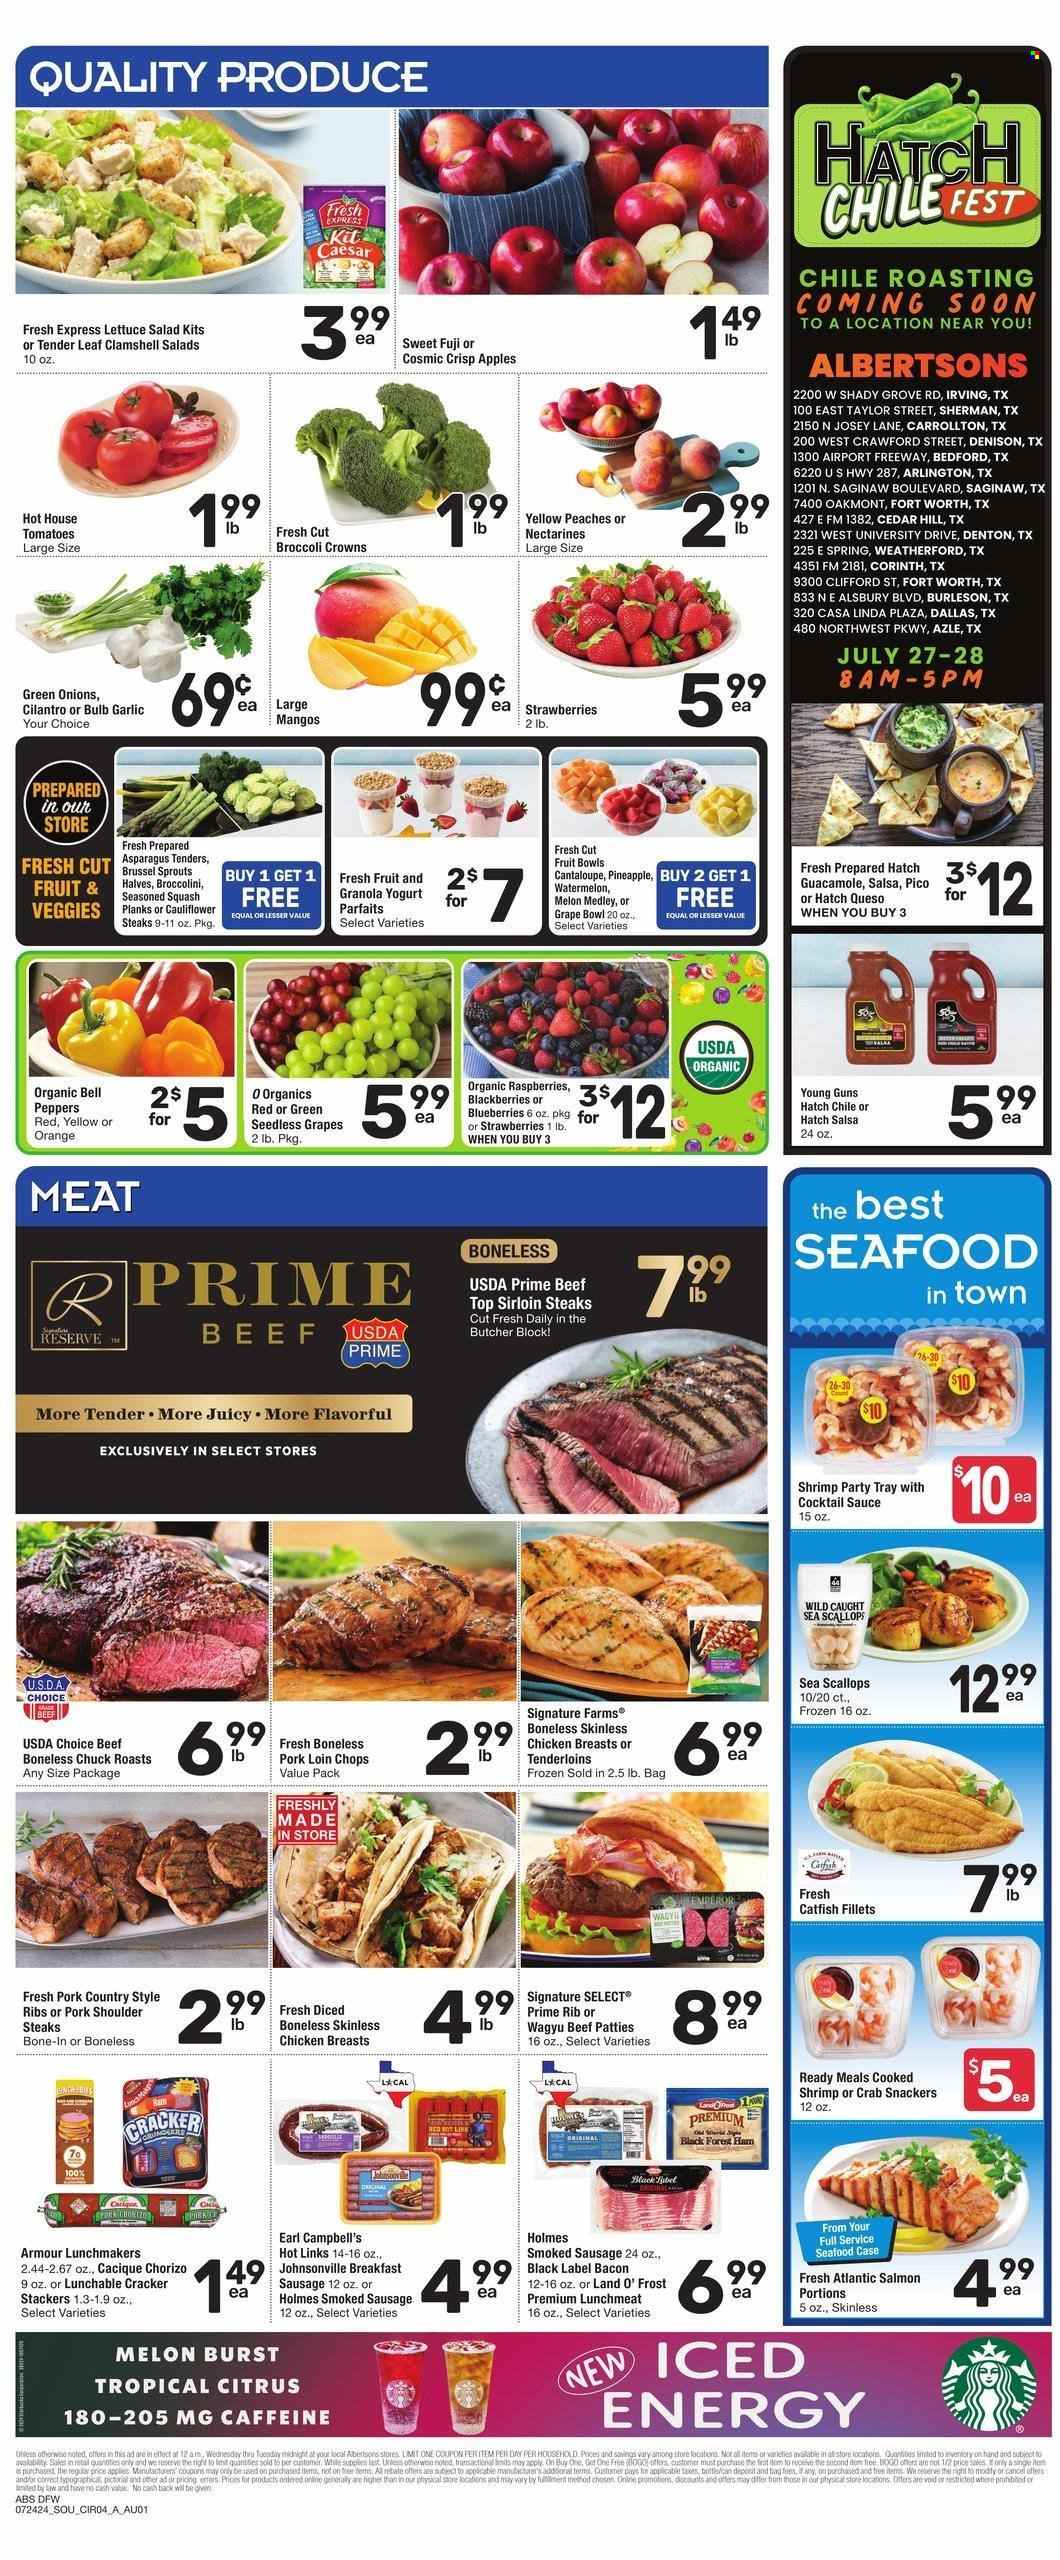 thumbnail - Albertsons Flyer - 07/24/2024 - 07/30/2024 - Sales products - pork chops, pork loin, pork meat, catfish, fish fillets, chicken breasts, chicken, seafood, crab, shrimps, ready meal, snack, chorizo, crackers, Campbell's, Johnsonville, sausage, smoked sausage, salmon, salmon fillet, lettuce, salad, garlic, cilantro, bulb, mango, cantaloupe, watermelon, pineapple, fruit cup, melons, bell peppers, peppers, grapes, seedless grapes, salsa, steak, sirloin steak, party tray, apples, tomatoes, nectarines, peaches, strawberries, broccoli, asparagus, cauliflower, brussel sprouts, broccolini, guacamole, cheese, blackberries, blueberries, raspberries, burger patties, dessert, granola, scallops, ribs, pork ribs, pork shoulder, country style ribs, bacon, lunch meat. Page 5.